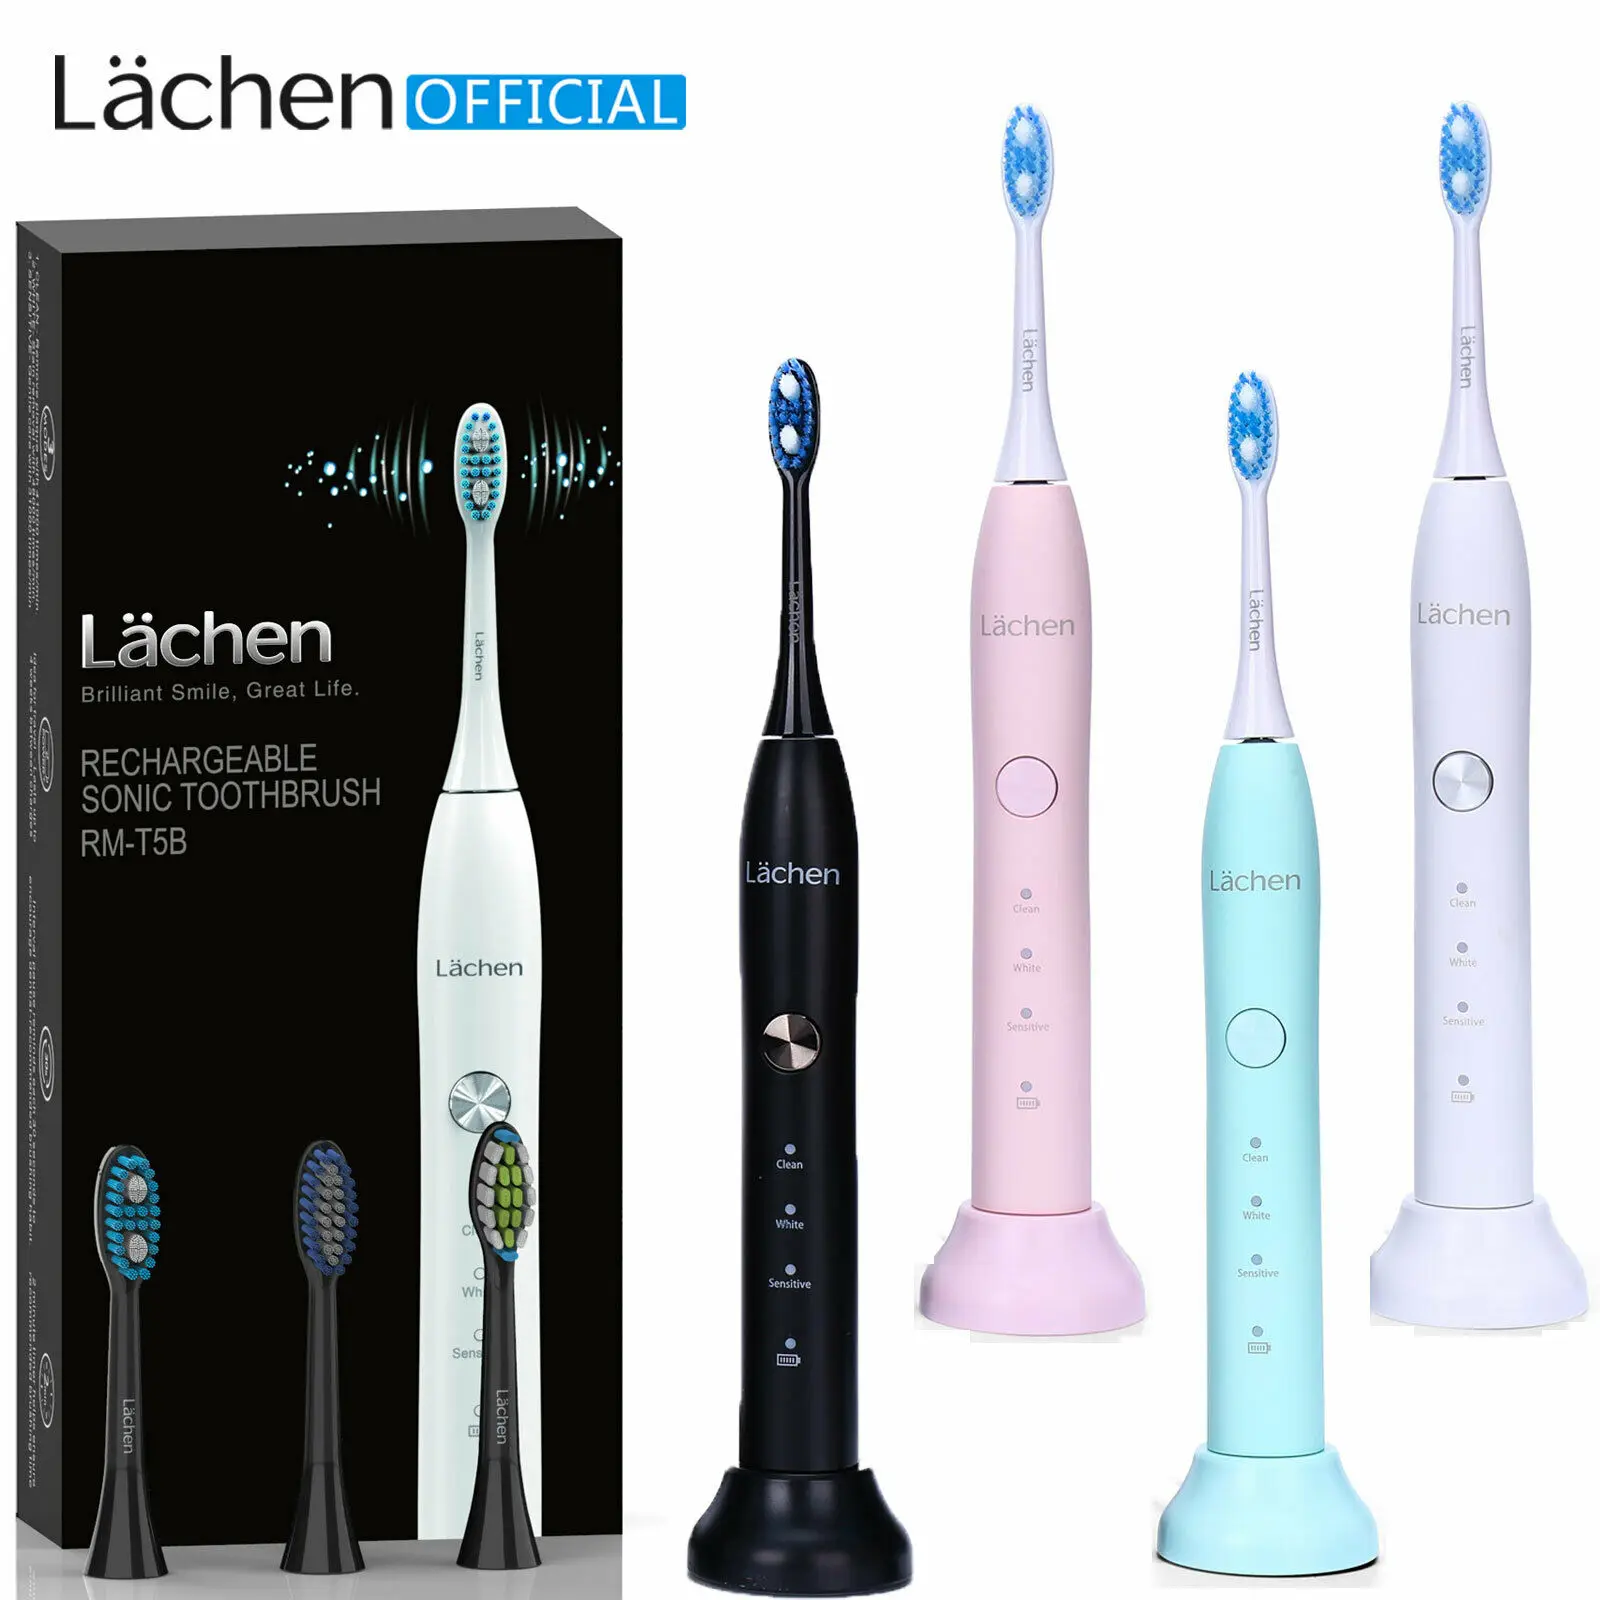 

Lachen T5 Sonic Electric Toothbrush USB Rechargeable 3 Modes 4 Brush Heads 48,000 oscillations per minute dropshipping